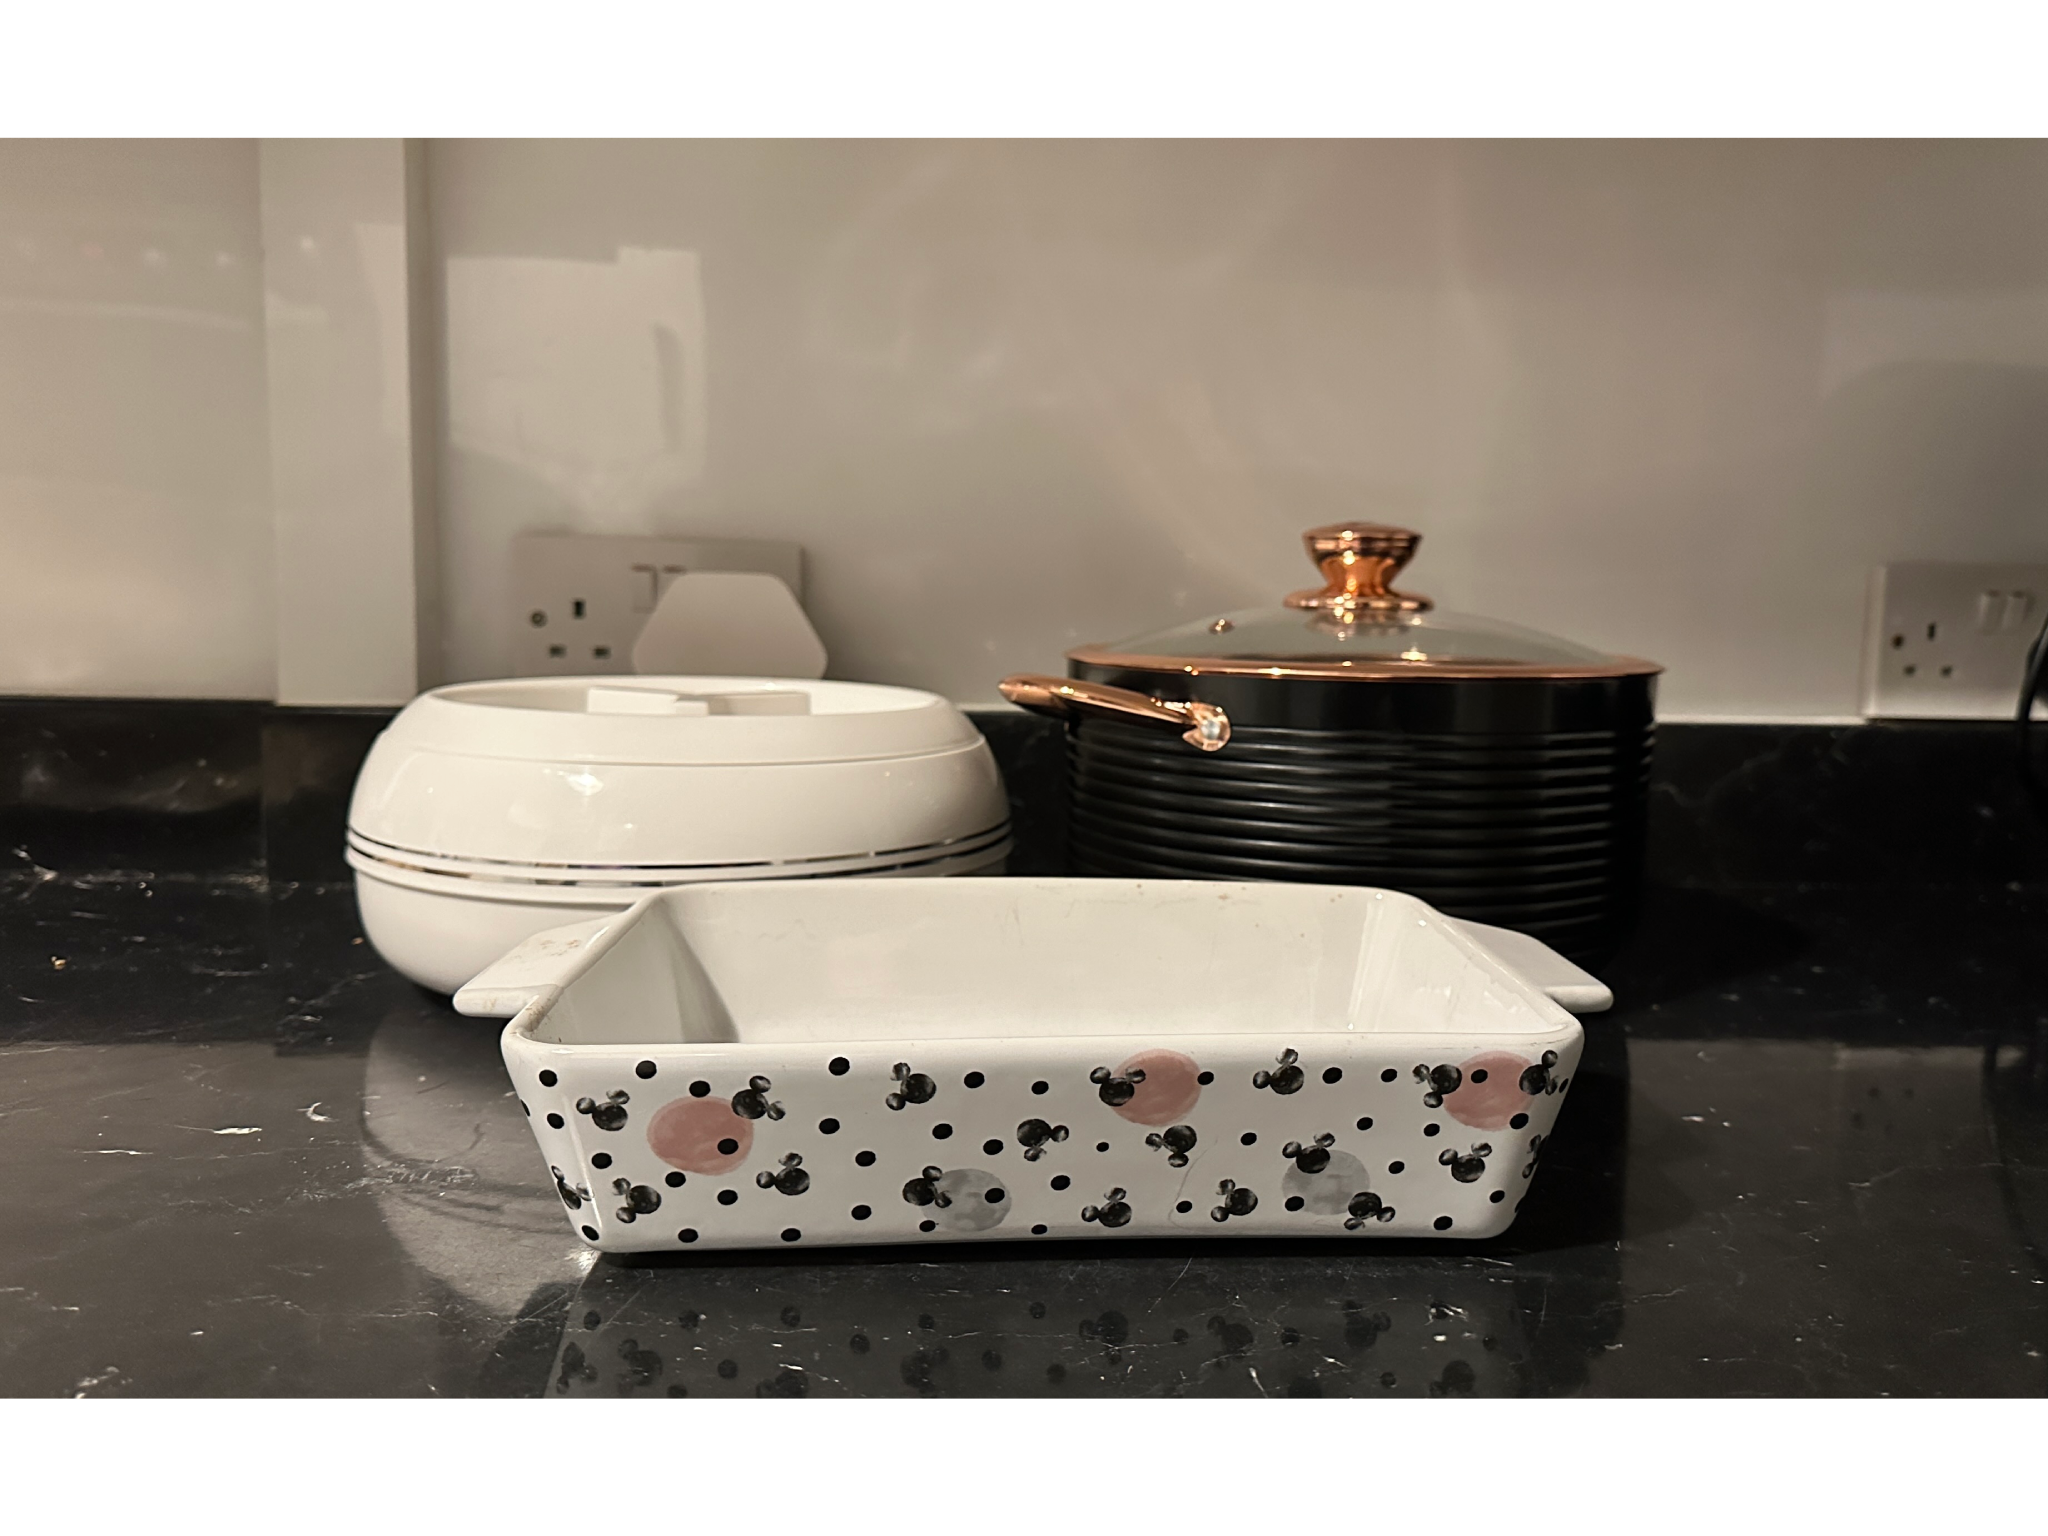 A selection of the tried and tested casserole dishes